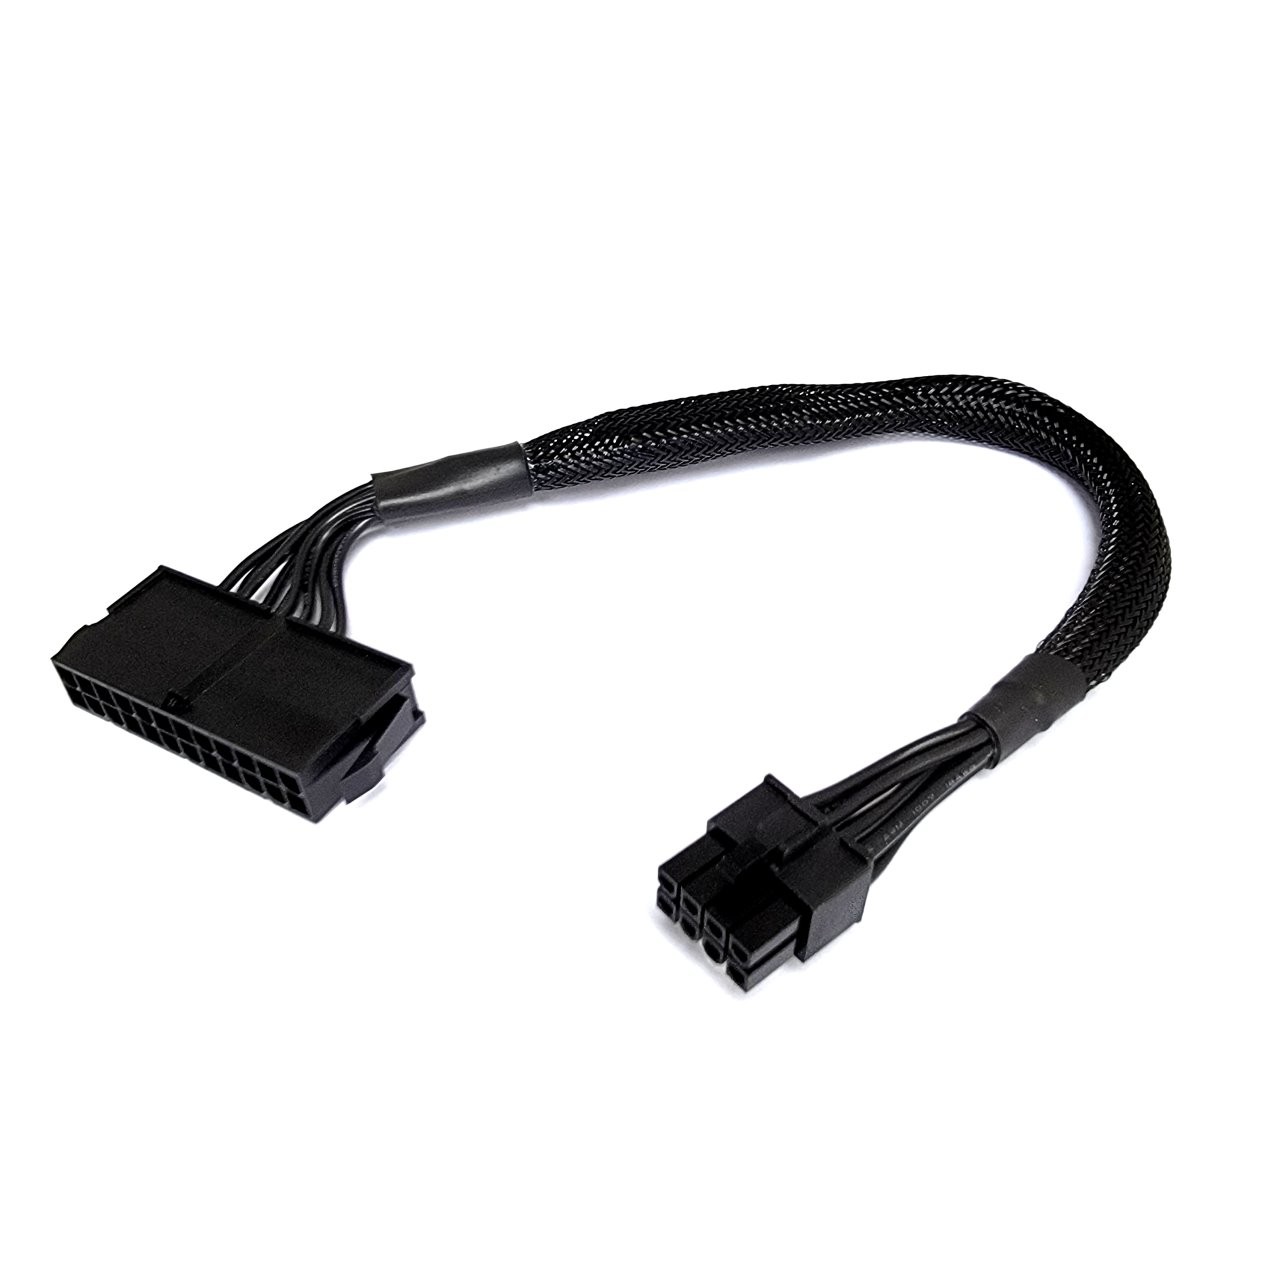 Dell Inspiron 3650 PSU Main Power 24 Pin to 8 Pin Adapter Cable 30cm -  